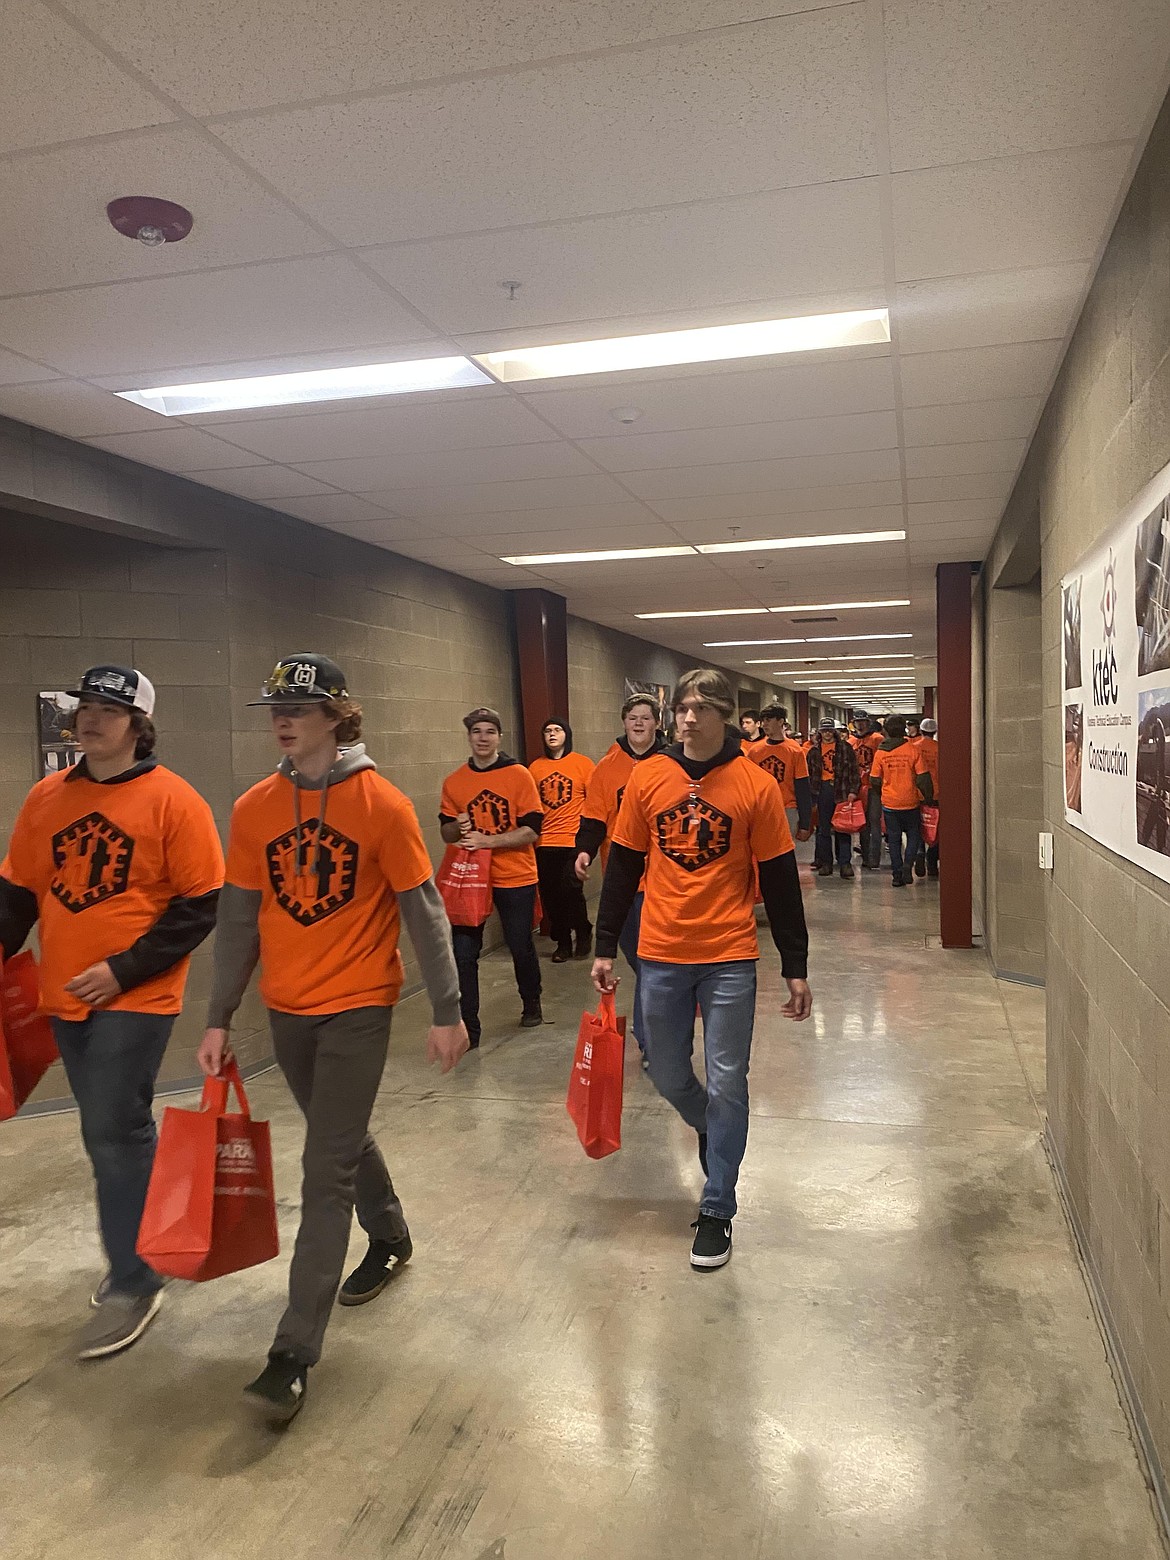 A sea of students in orange head through the halls of the Kootenai Technical Education Center Friday at the annual Hard Hats, Hammers and Hot Dogs event. Three groups of students from 18 local schools came to connect with educational, trade and technical opportunities.